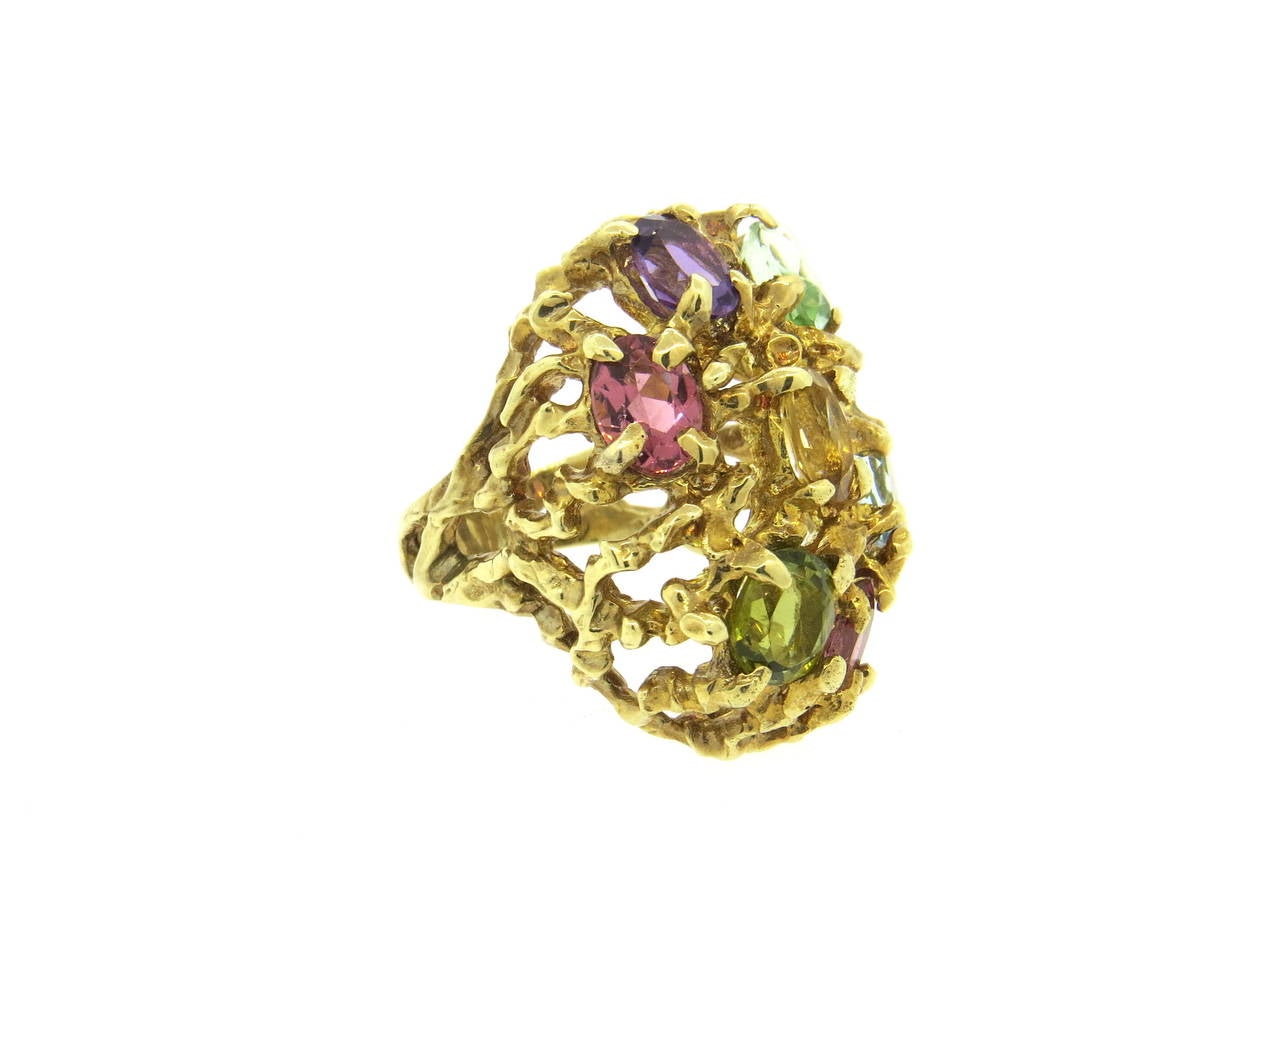 Large 14k gold free form ring, set with multicolor semi precious gemstones, including tourmaline, amethyst, citrine, topaz. Ring is a size  7 1/2, ring top measures 32mm x 25mm, sits approximately 15mm from the top of the finger. Weight of the piece